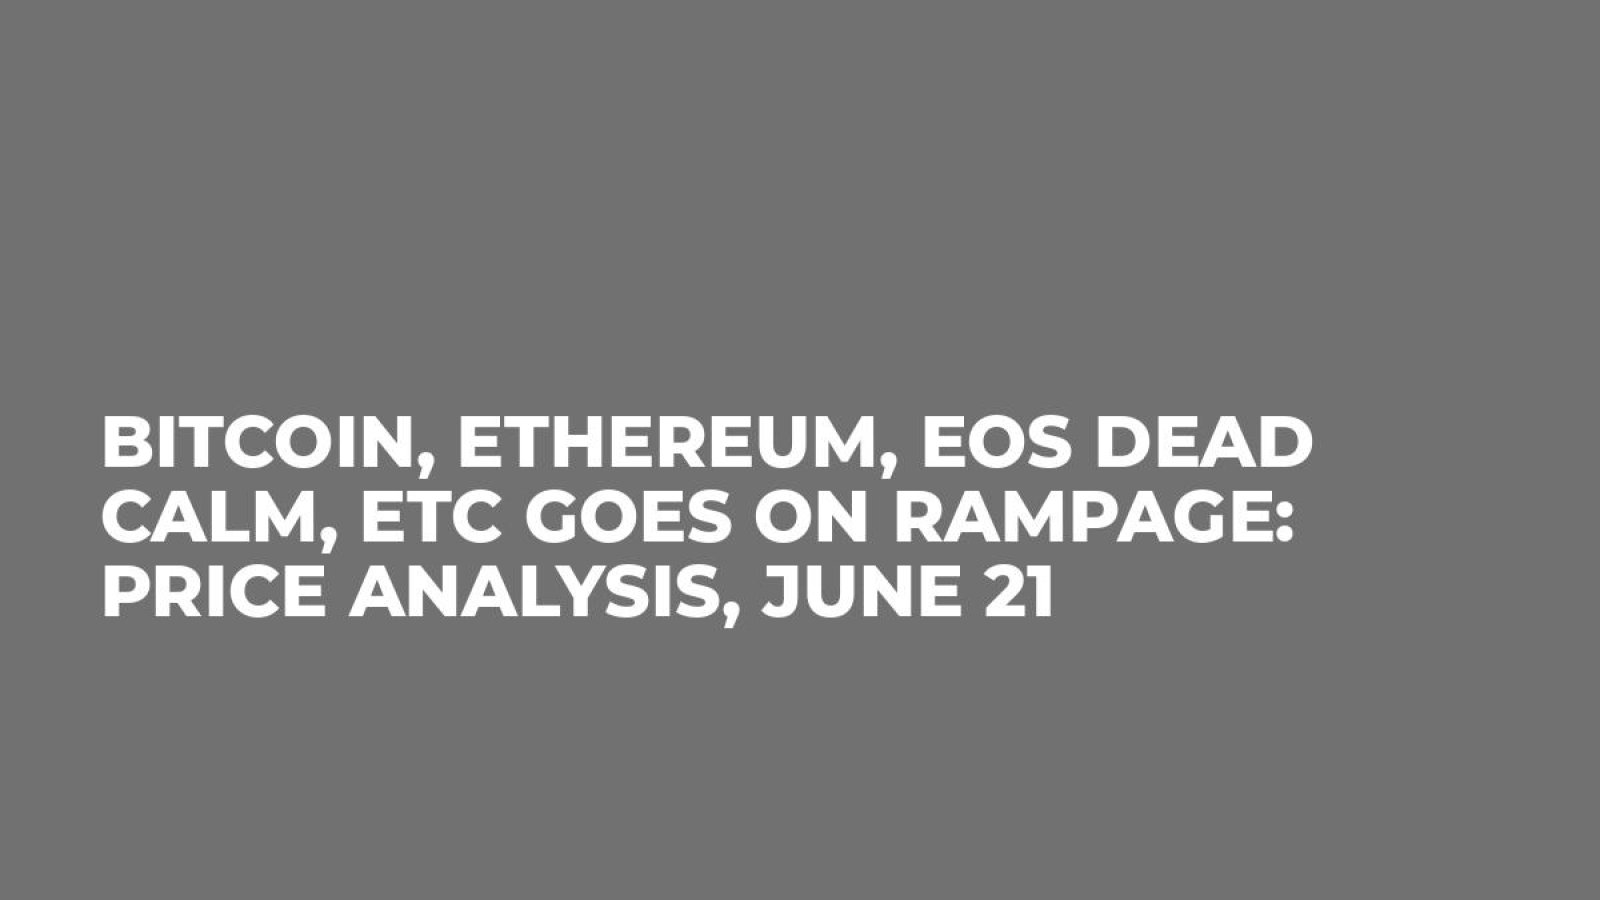 Bitcoin, Ethereum, EOS Dead Calm, ETC Goes on Rampage: Price Analysis, June 21